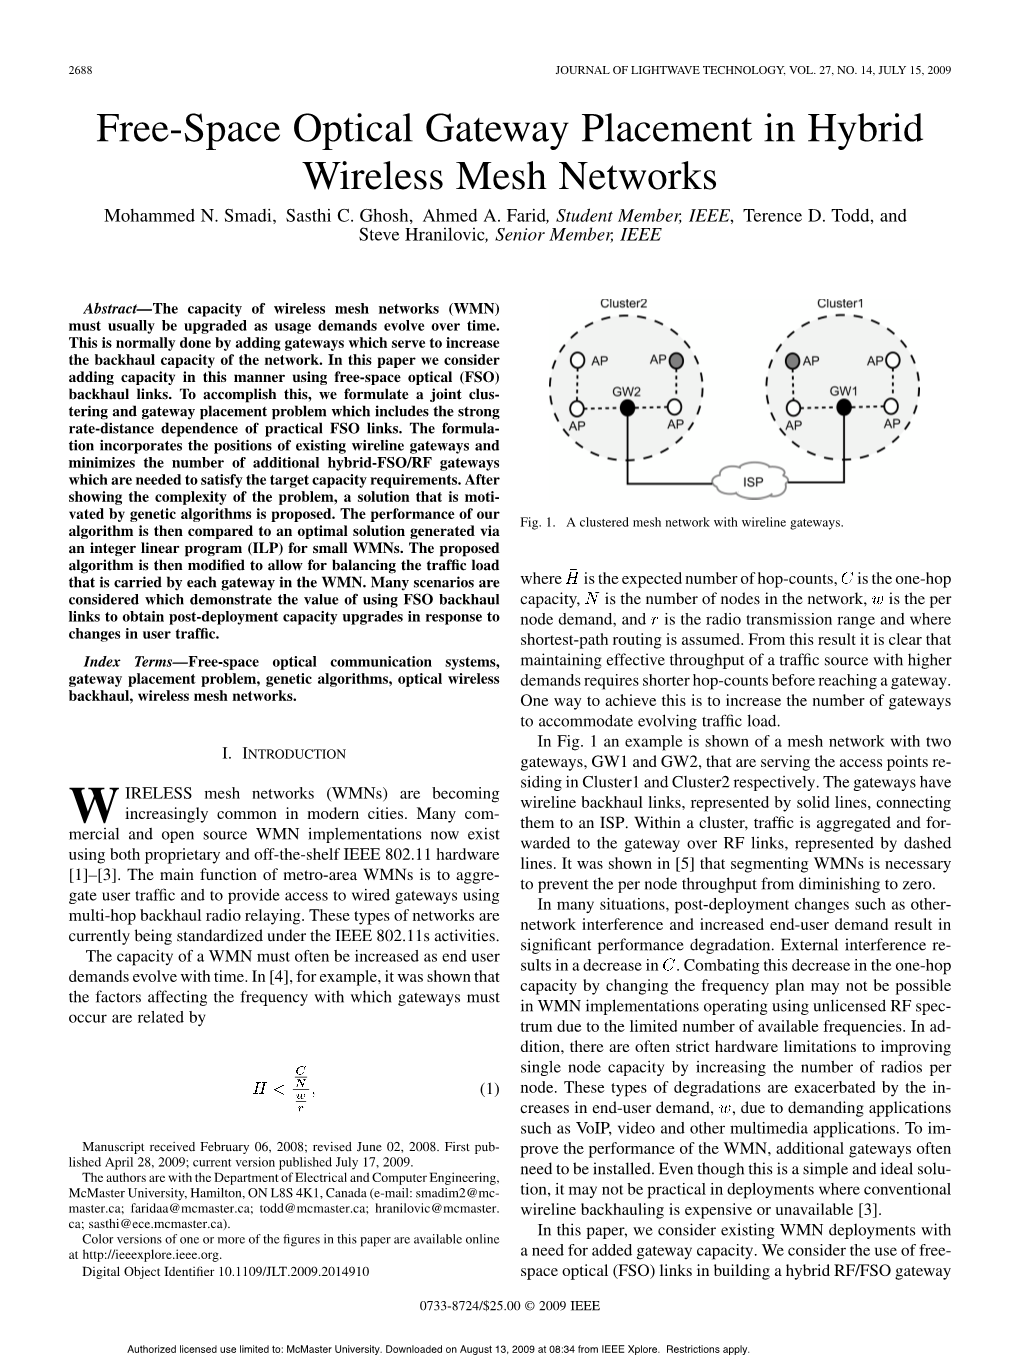 Free-Space Optical Gateway Placement in Hybrid Wireless Mesh Networks Mohammed N